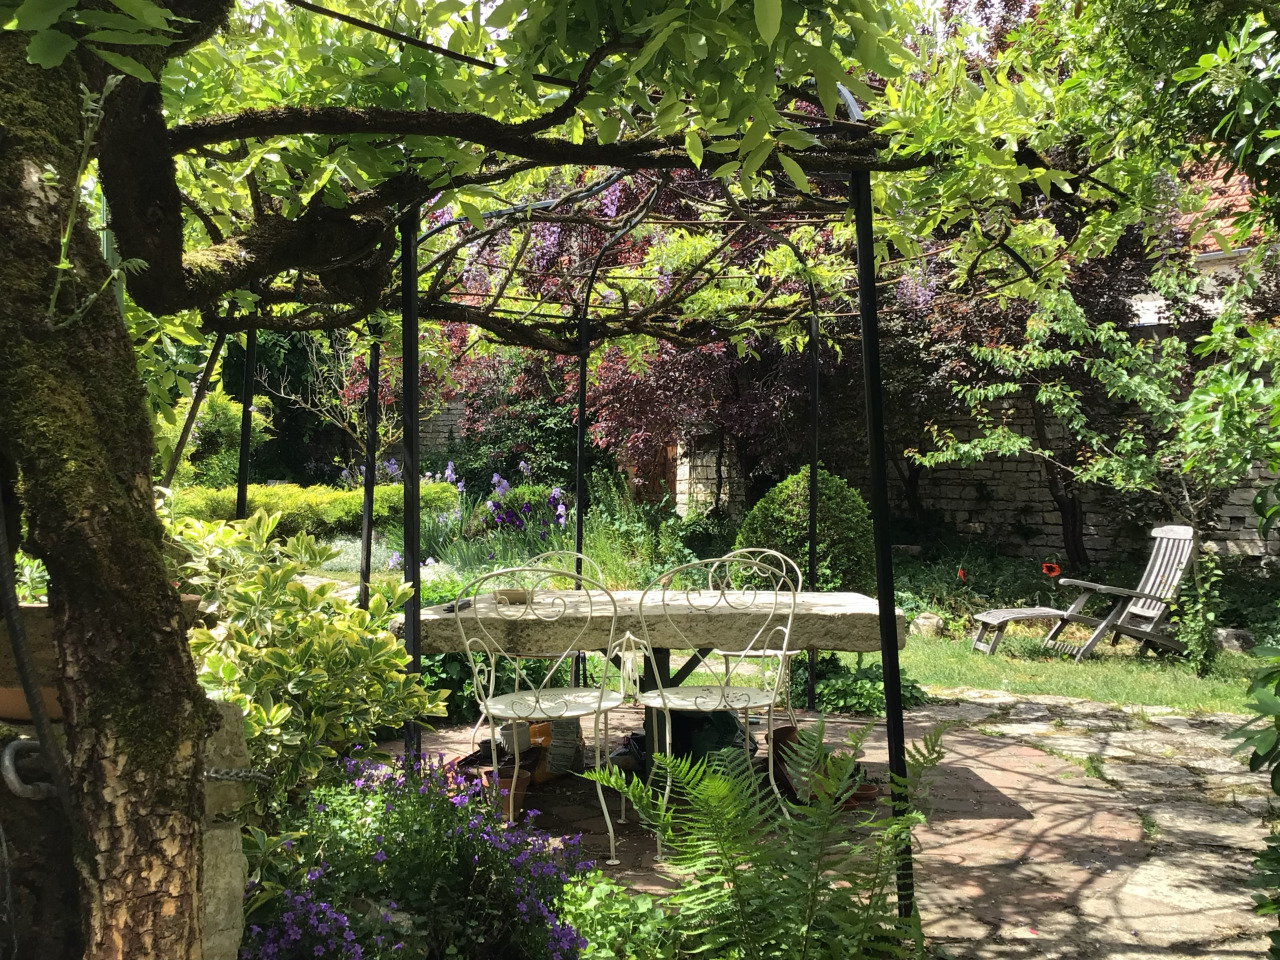 Sunday morning #french countryside #Our French Country Life #arbor#garden#wisteria#garden table#Bourgogne #expat in france